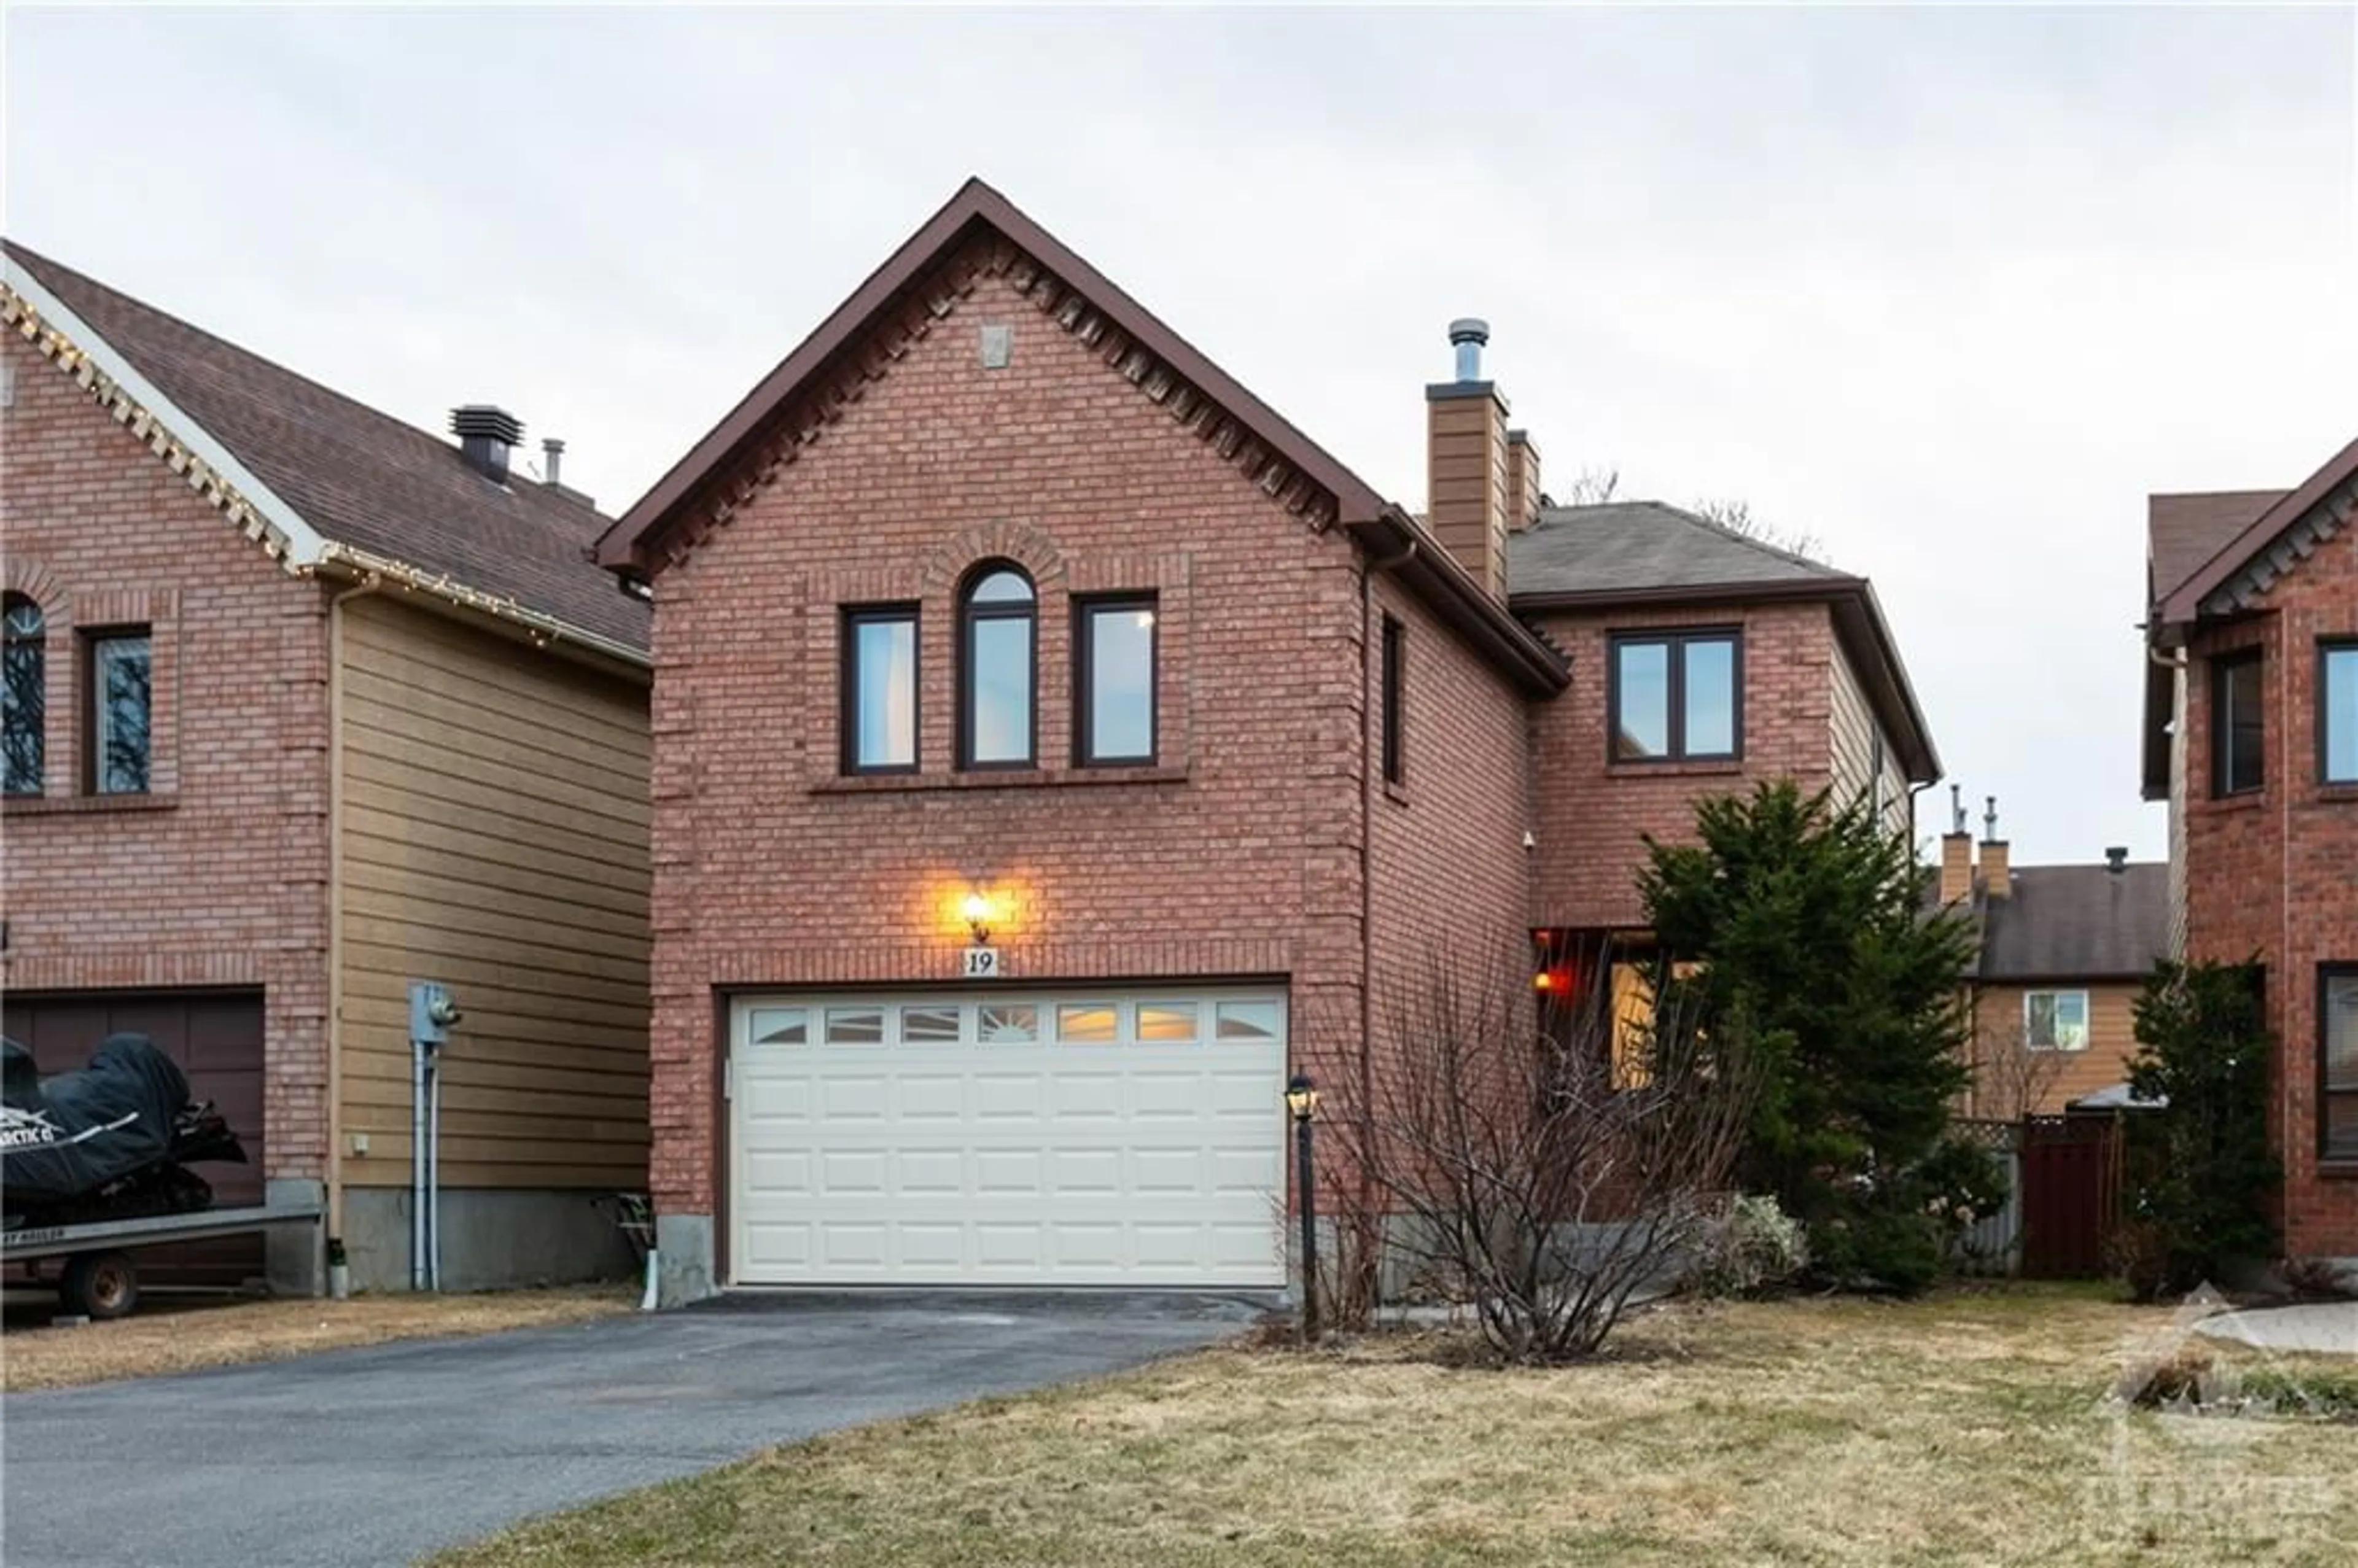 Home with brick exterior material for 19 INWOOD Dr, Kanata Ontario K2M 1Z6